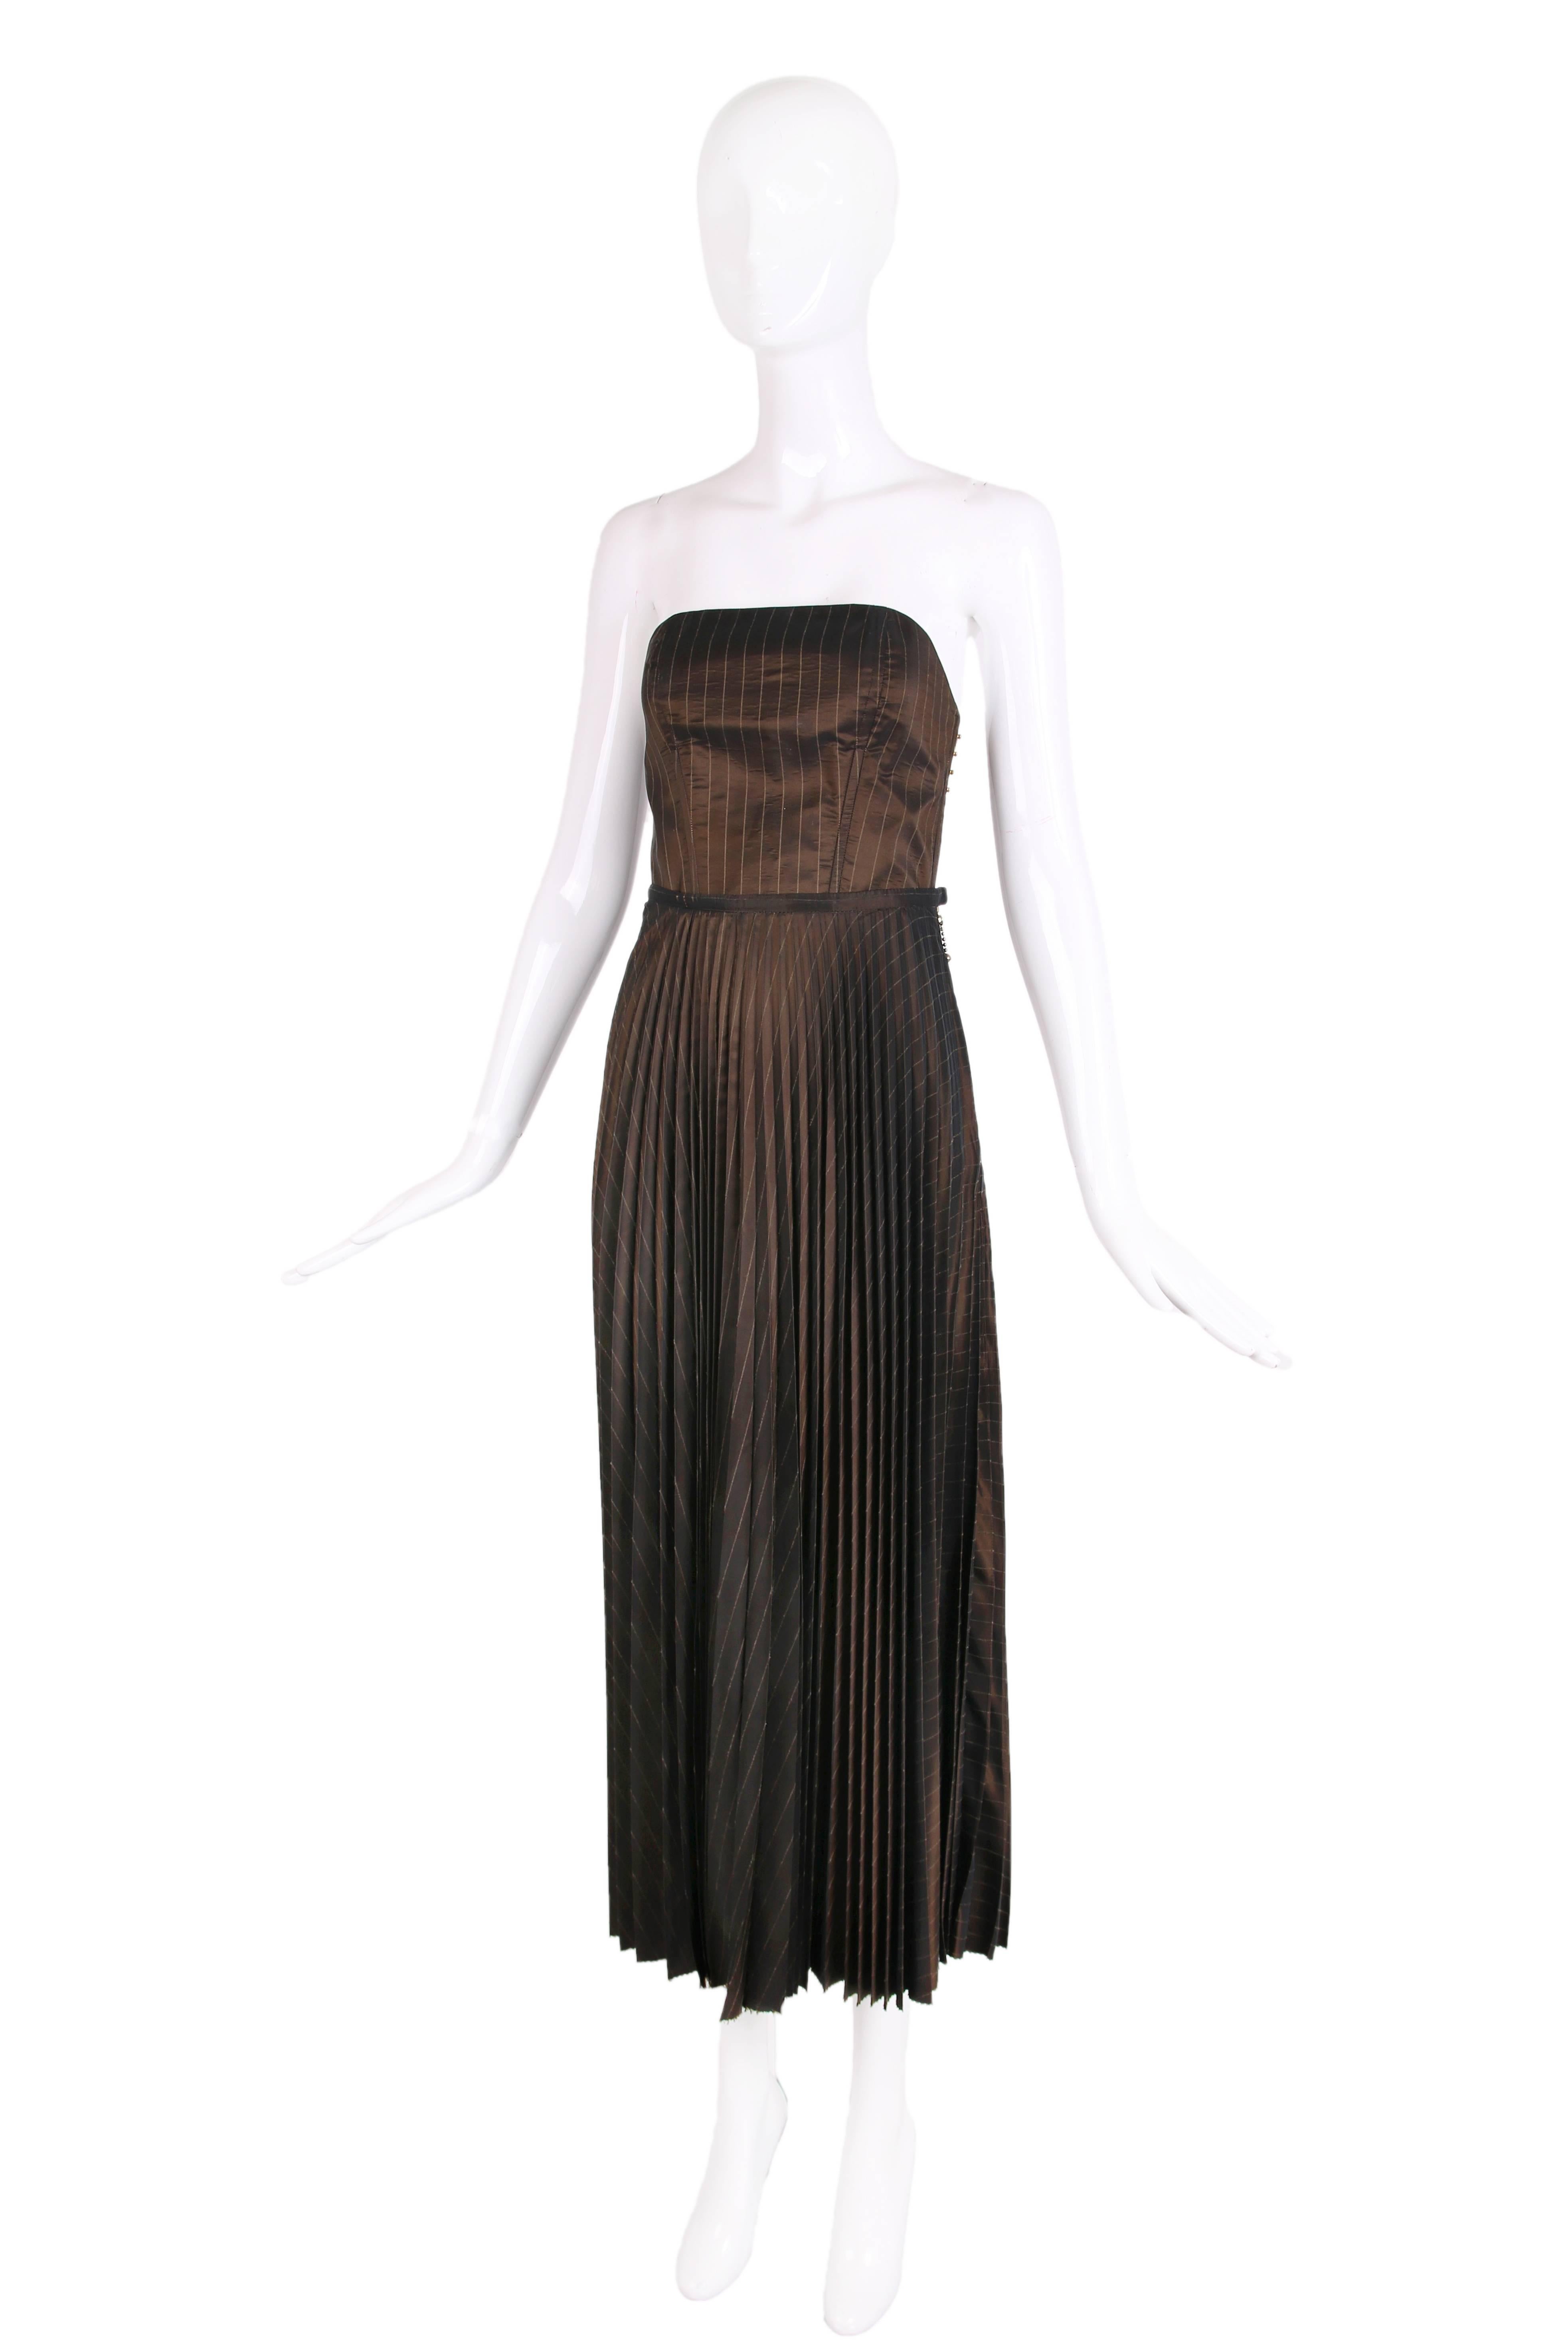 1990's Jean Paul Gaultier brown striped bustier and pleated skirt ensemble. In excellent condition. Please see measurements. 
MEASUREMENTS:
Top:
Bust - 34"
Waist - 23"
Length - 10"
Skirt:
Waist - 28"
Hip - Free
Length - 37"